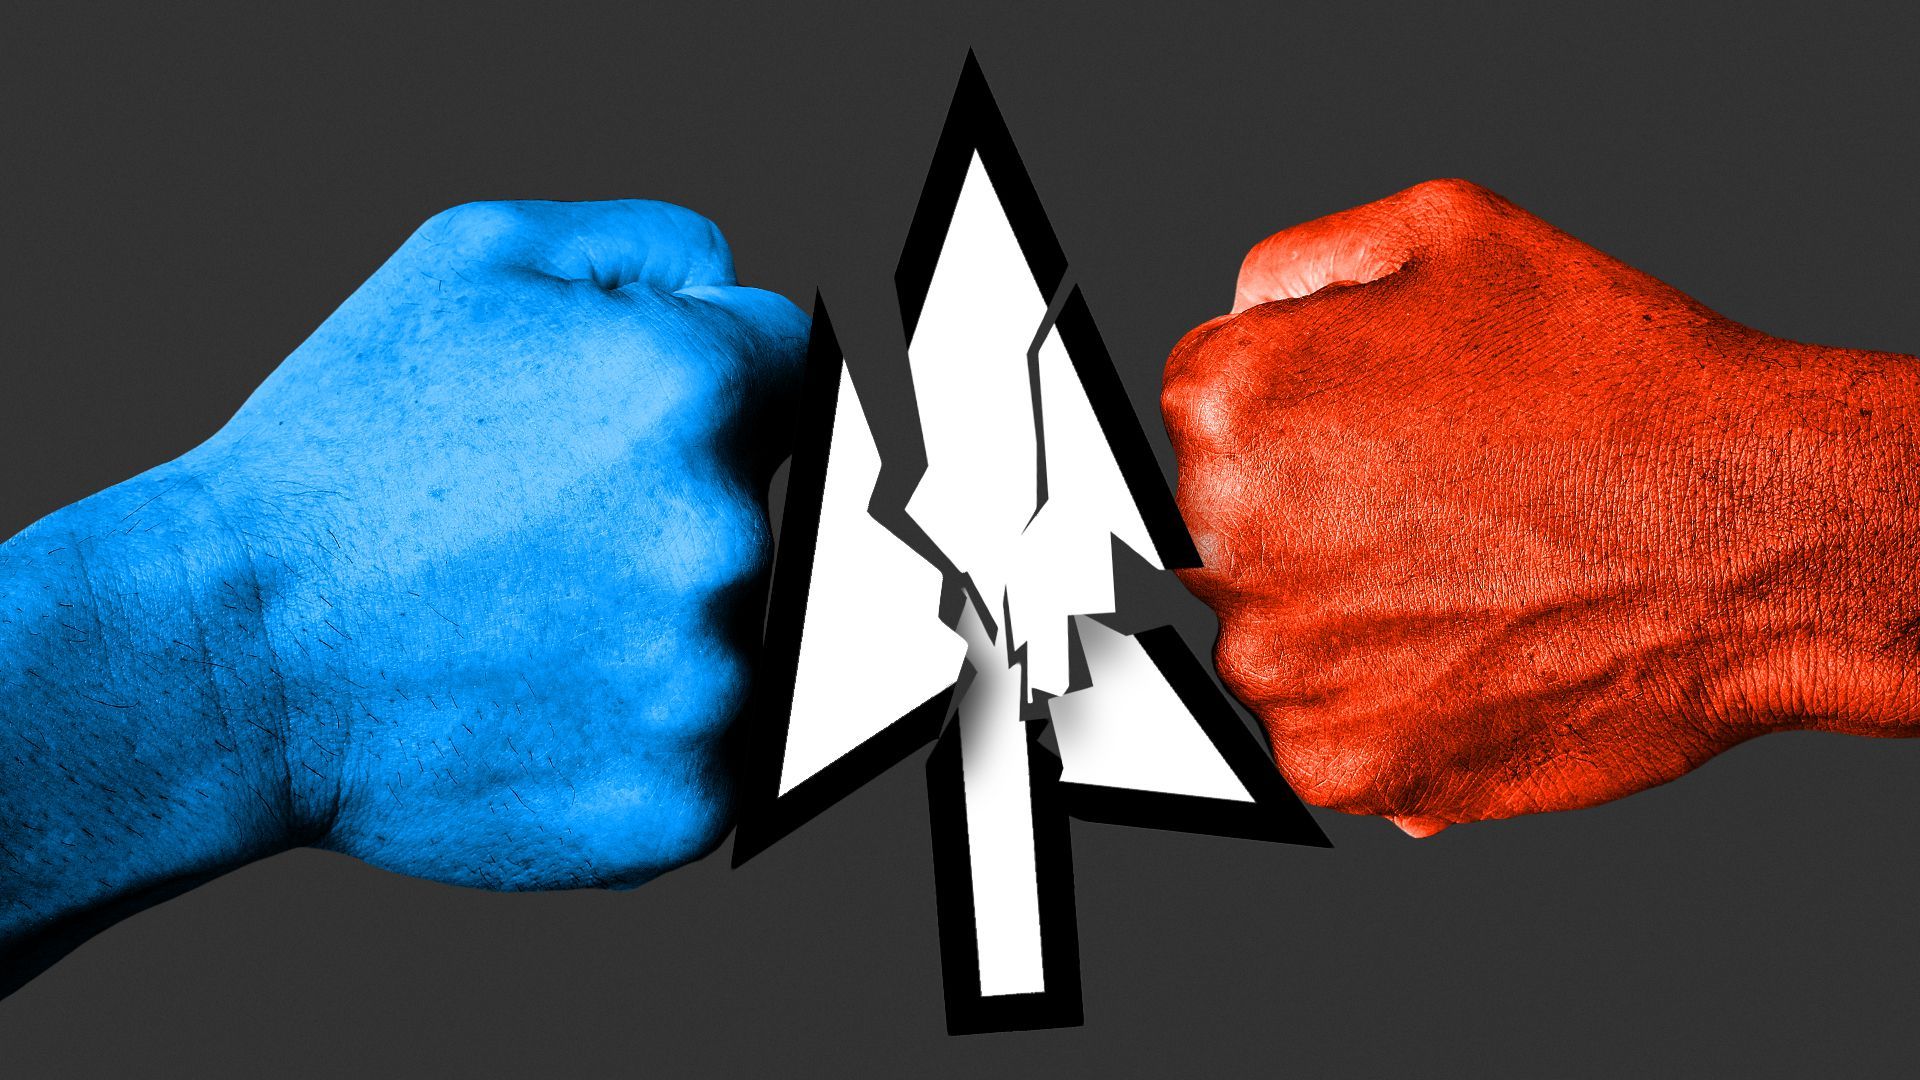 Illustration of two fists in blue and red punching either side of a cracking cursor arrow